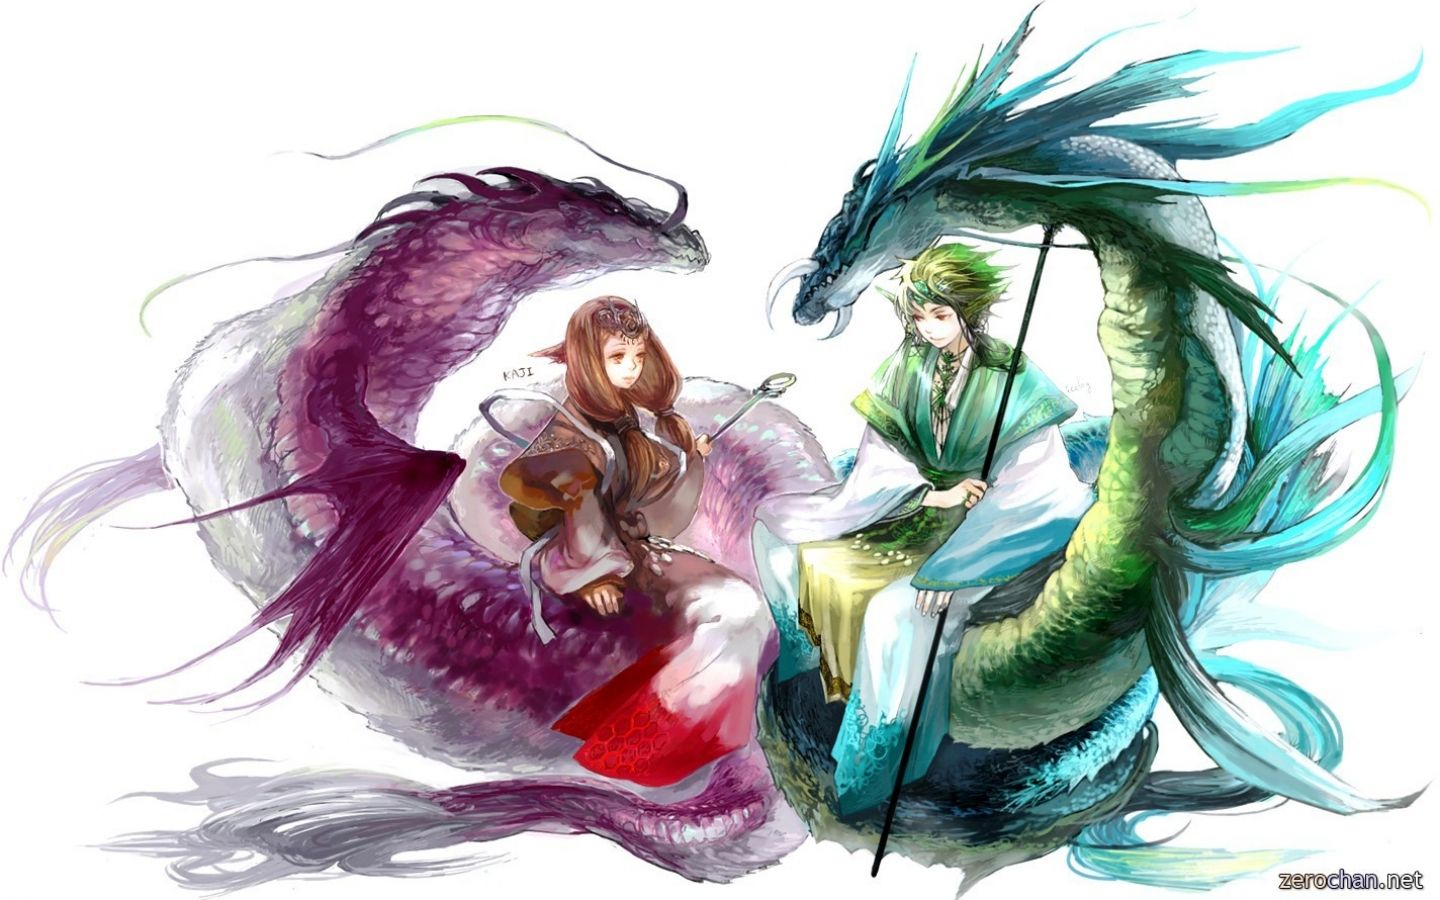 Jozso121 The Best Anime Wallpaper HD 1 Jpg Dragons With